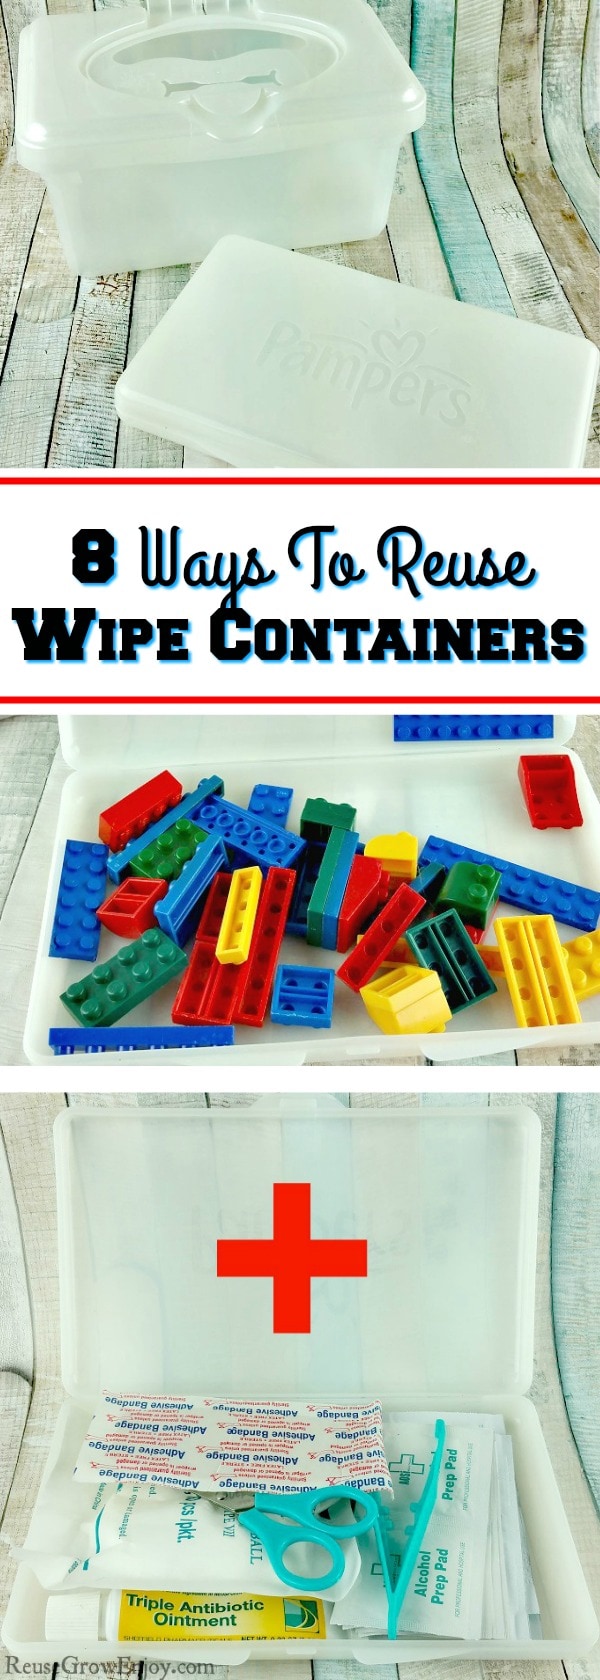 Baby wipe containers are a handy little plastic box that you can repurpose in so many different ways. I am going to share 8 ways to reuse wipe containers.